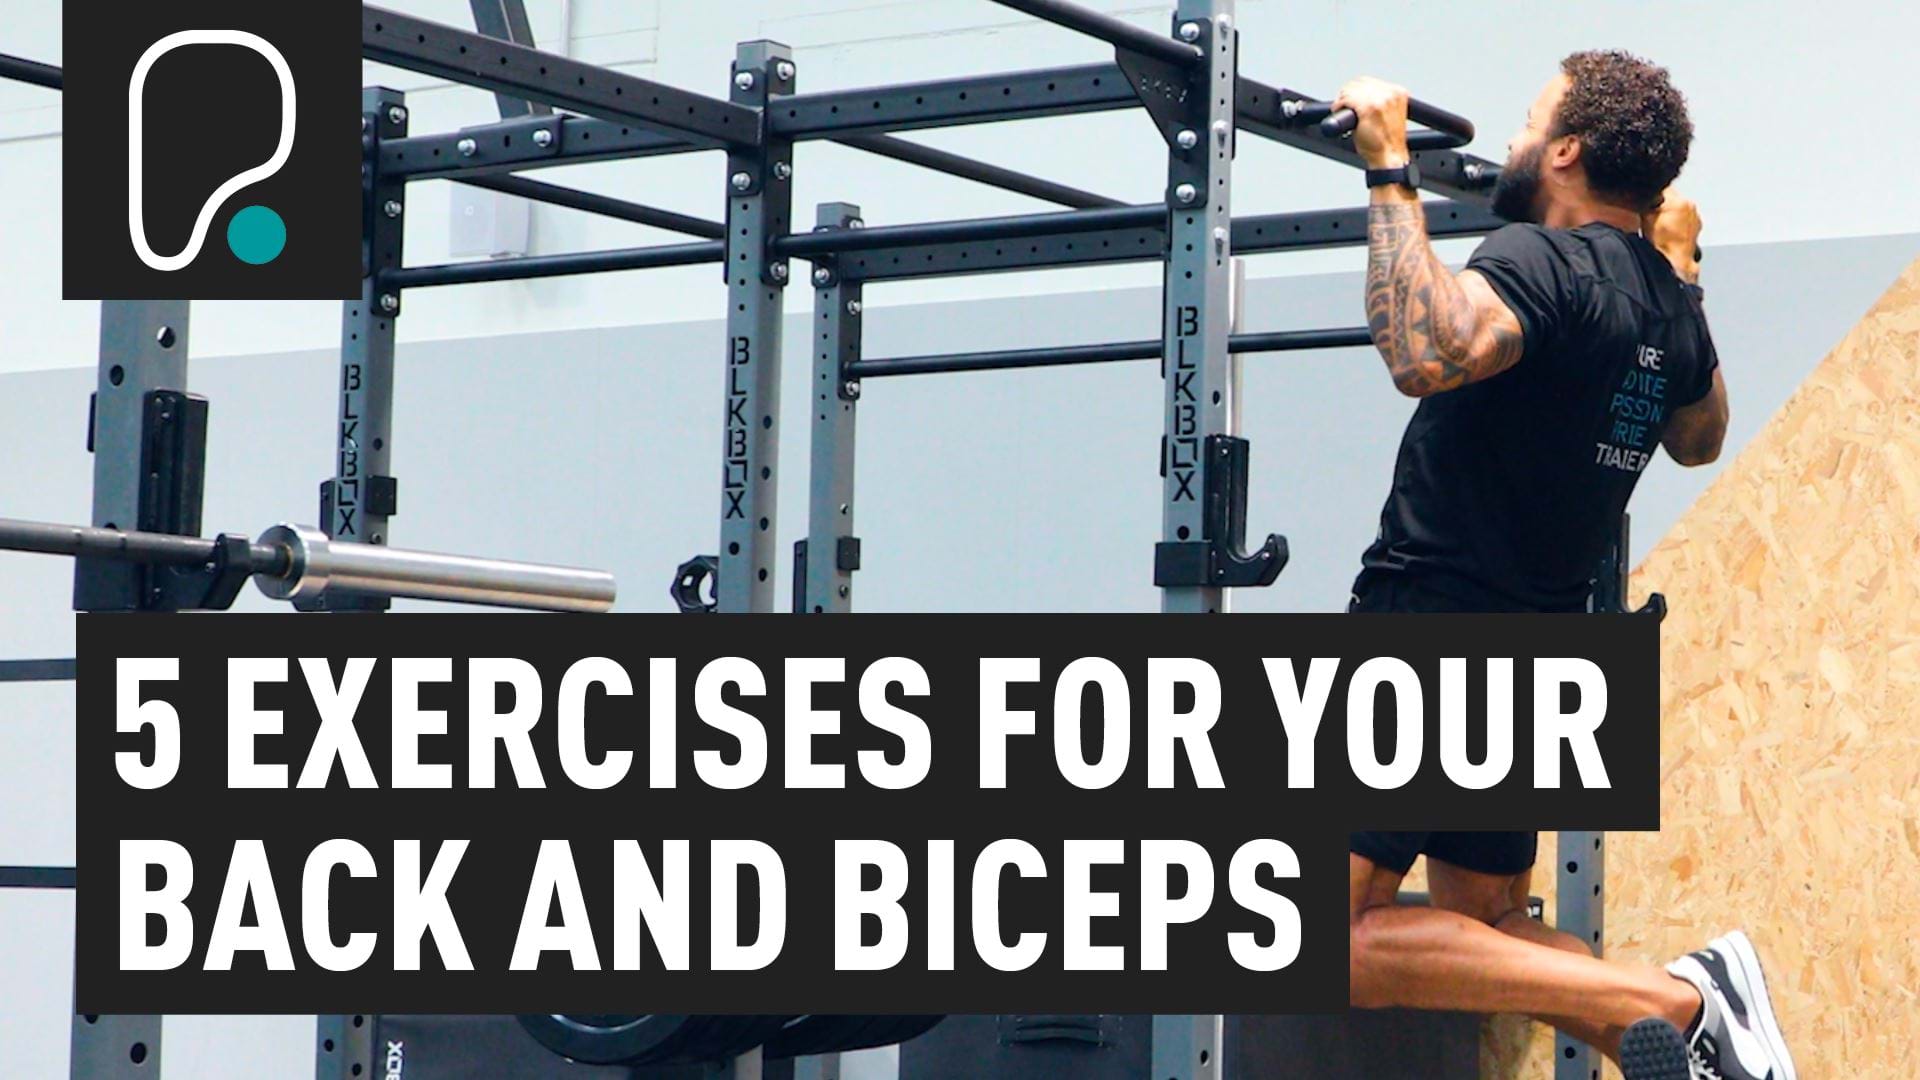 Back and bicep workout guide: how to structure yours